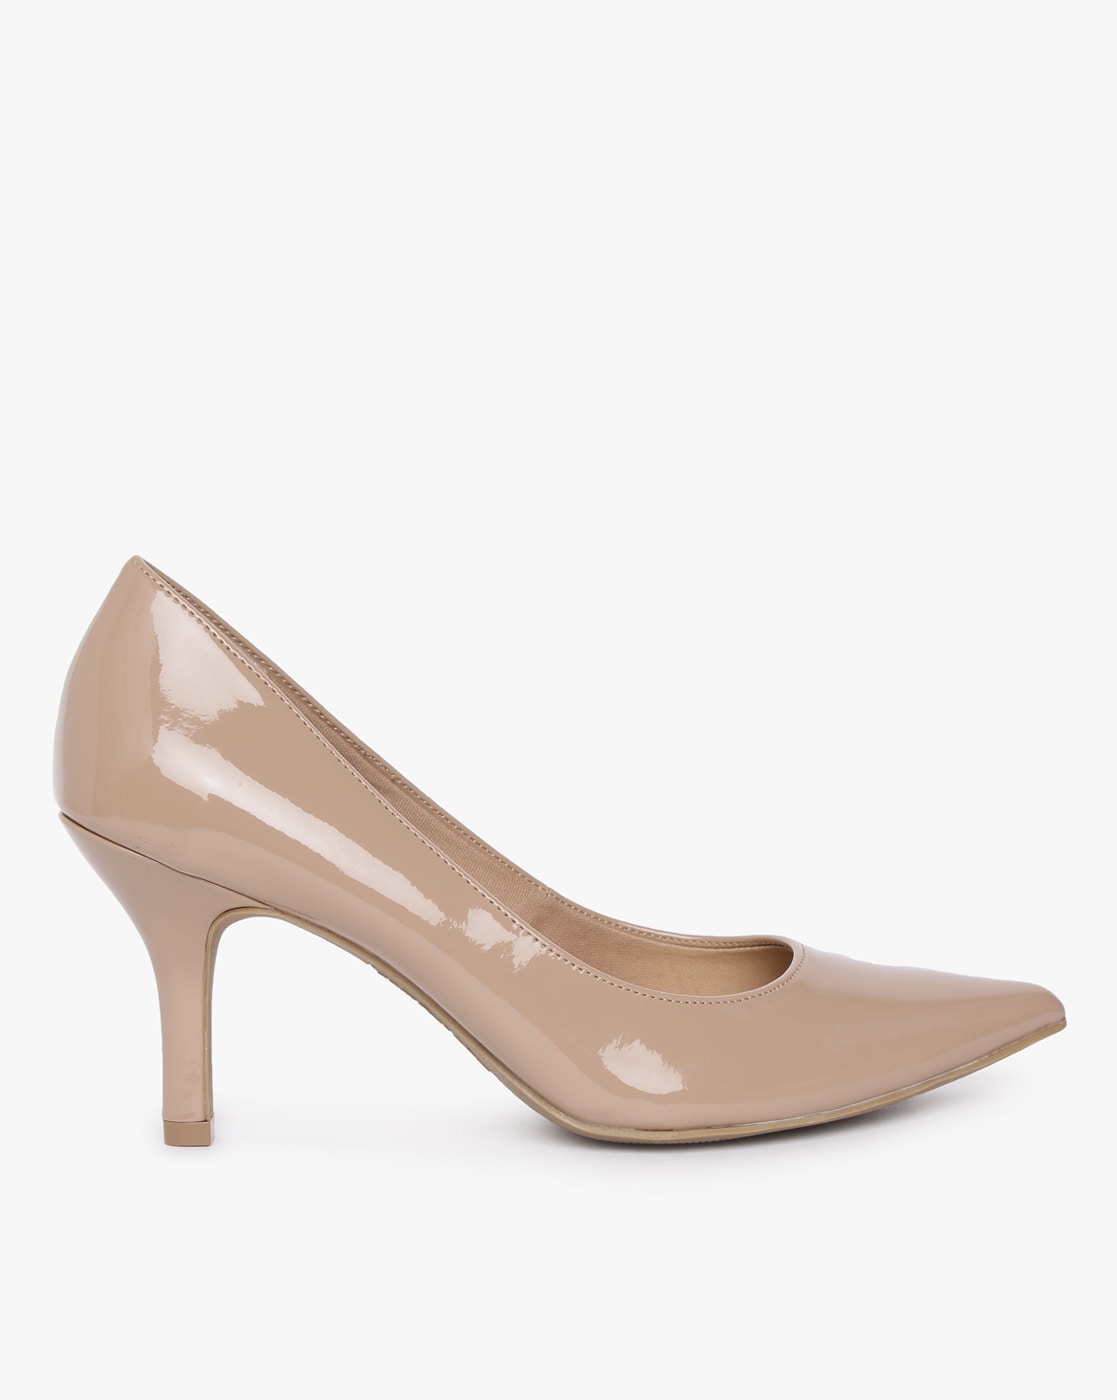 comfortable pointed toe pumps